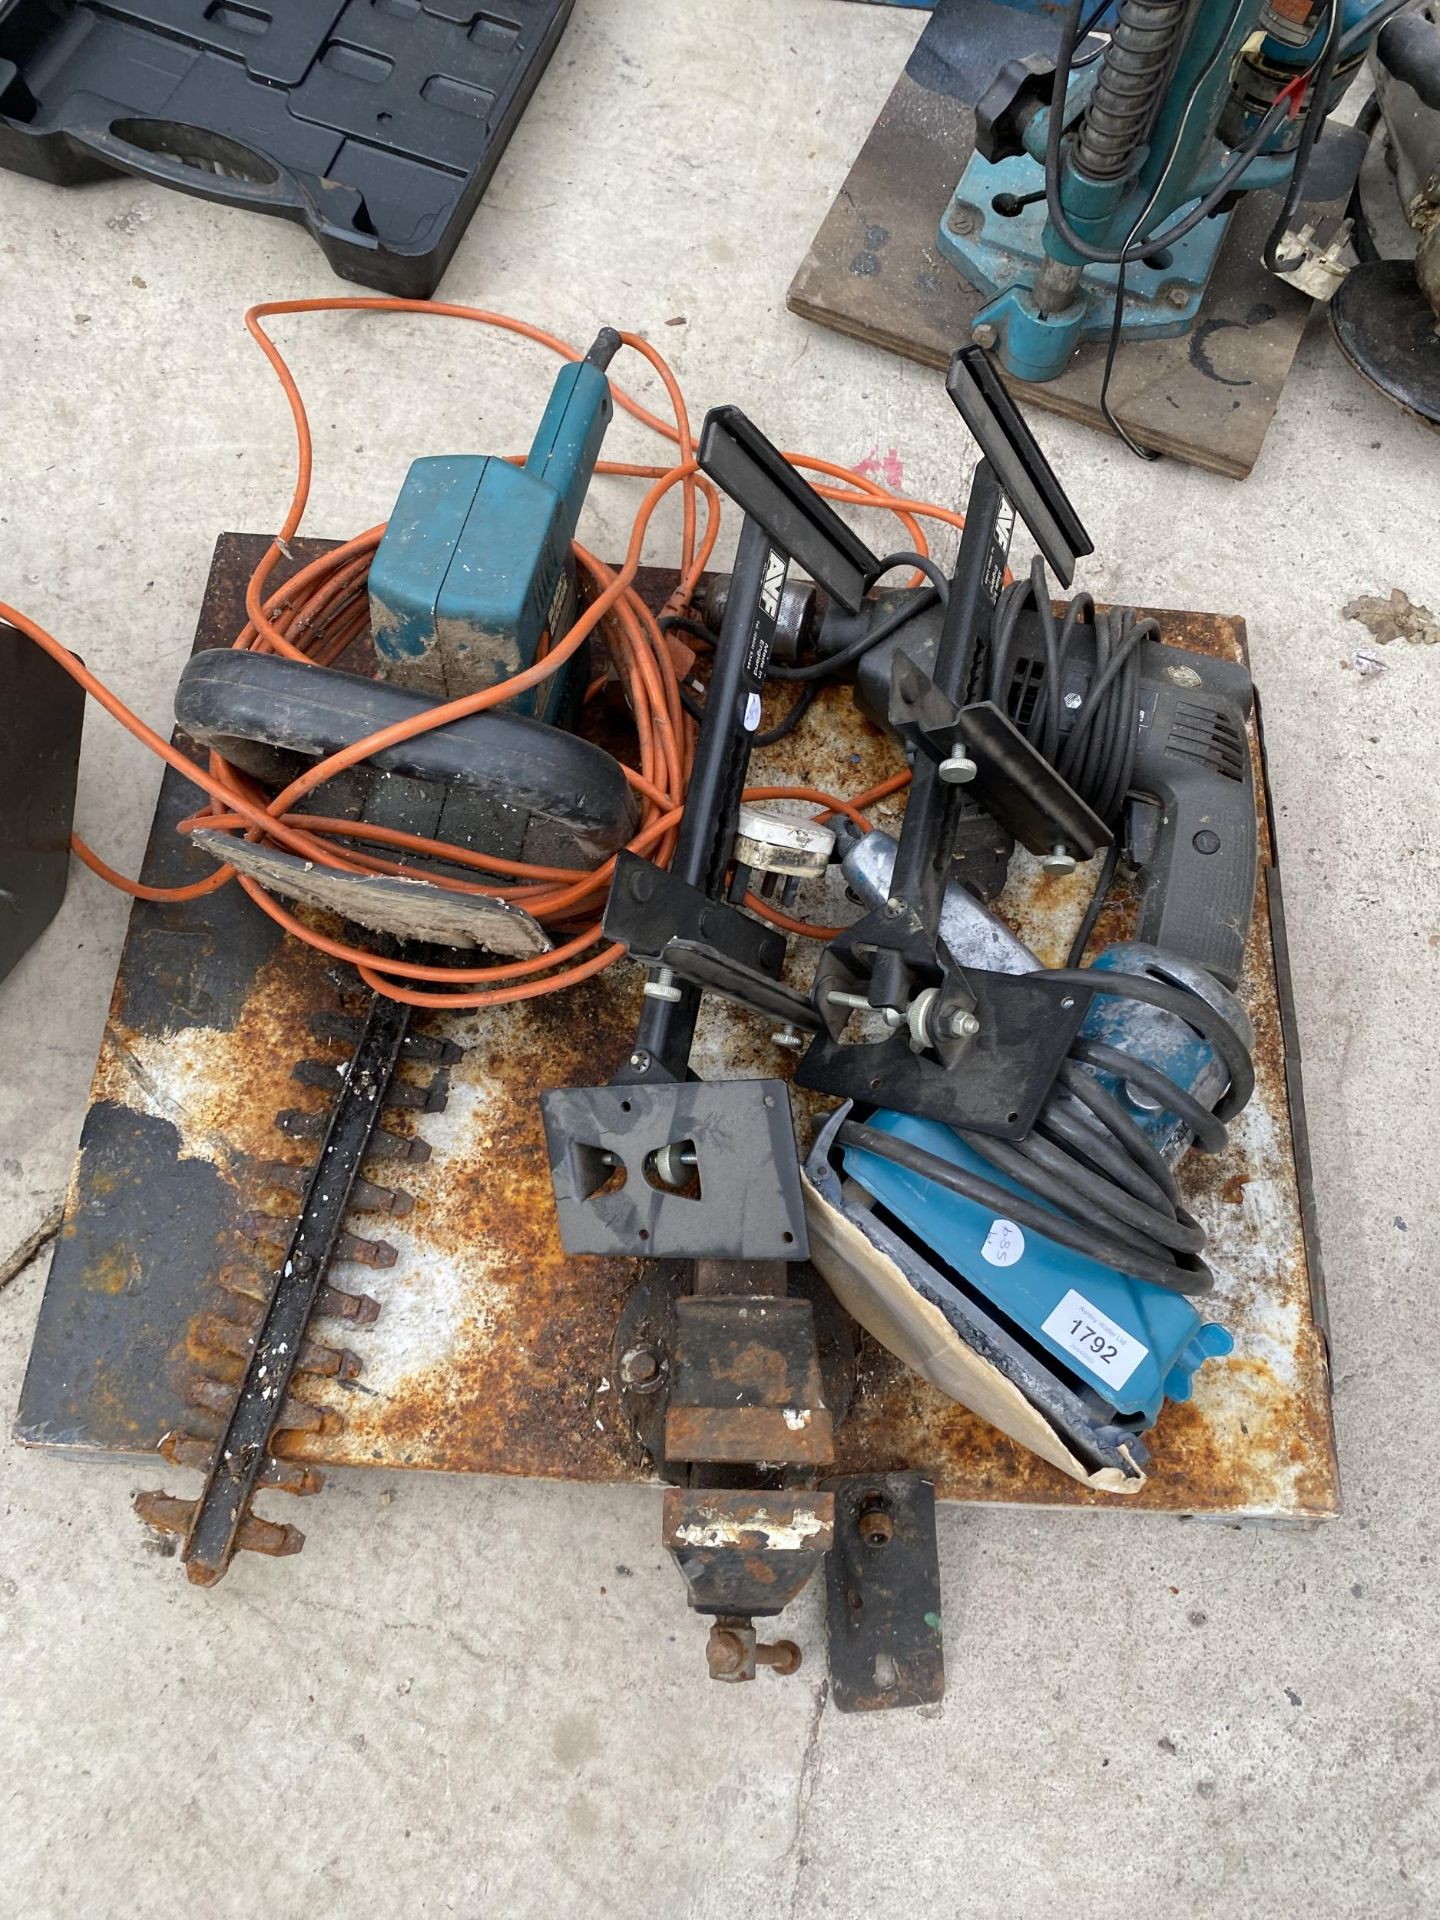 AN ASSORTMENT OF POWER TOOLS TO INCLUDE A SANDER, A HEDGE TRIMMER AND A DRILL ETC